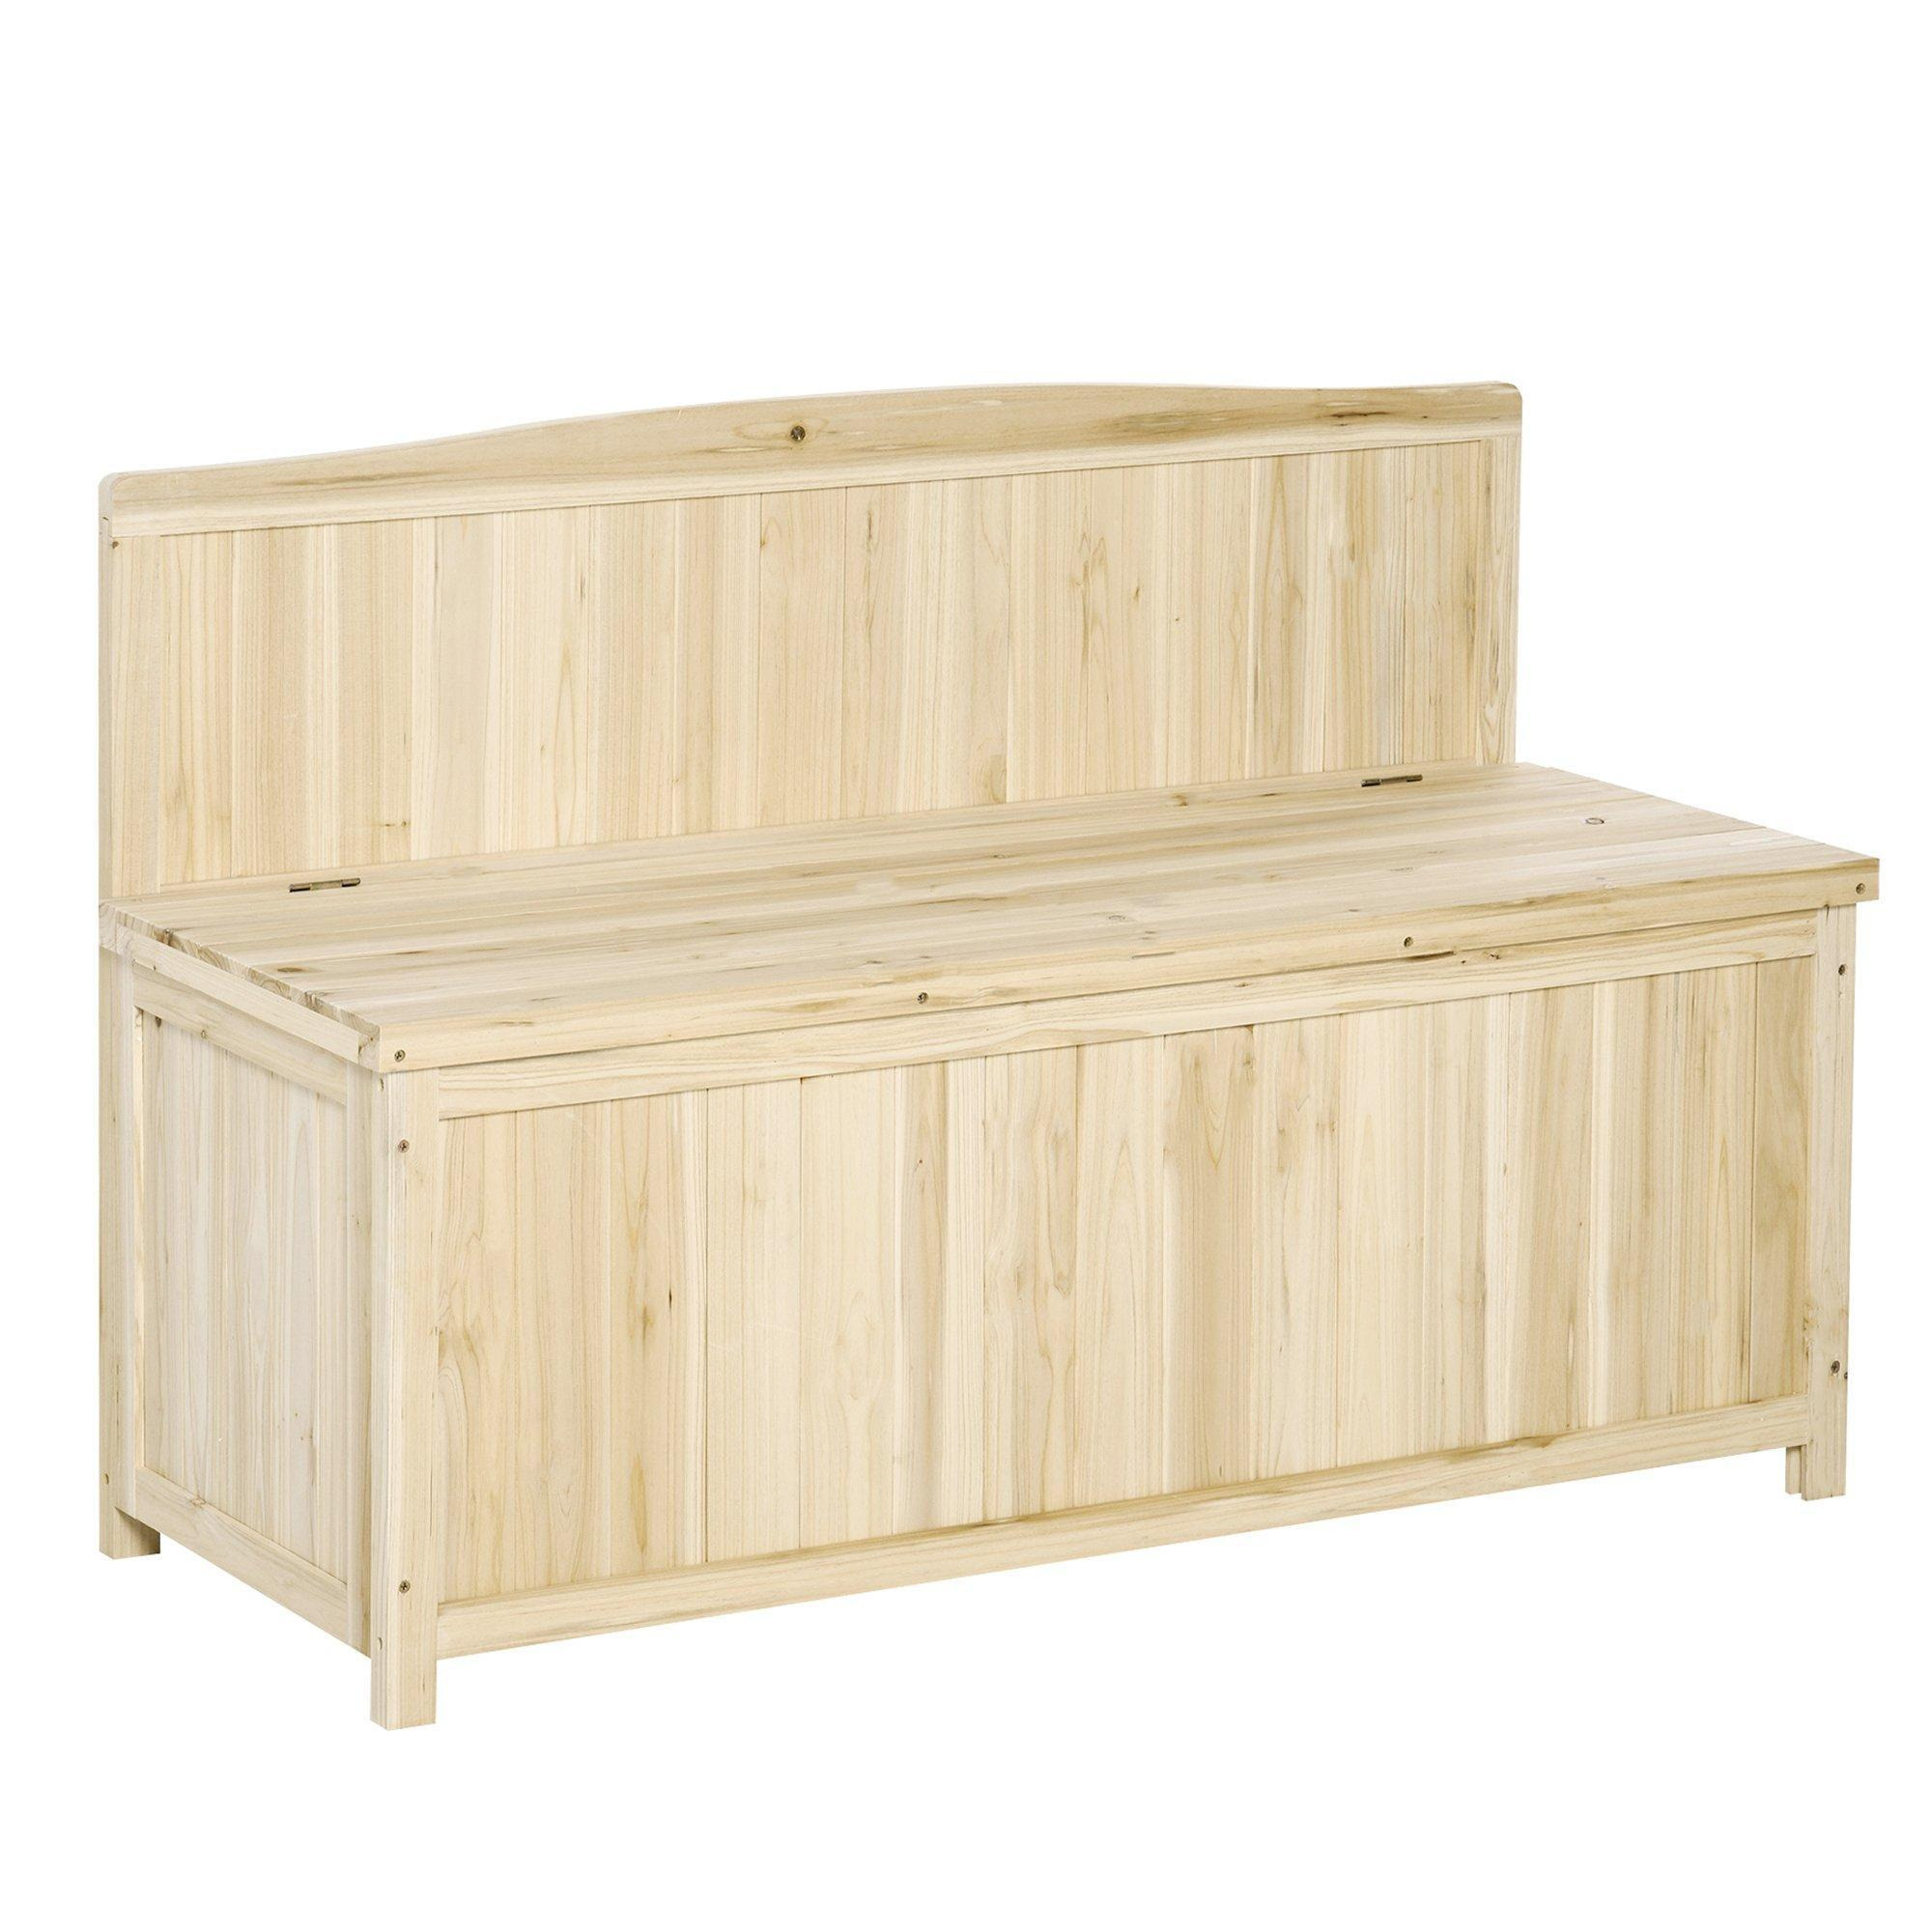 Wood Storage Bench for Patio Furniture, Outdoor Garden Seating Tools - image 1